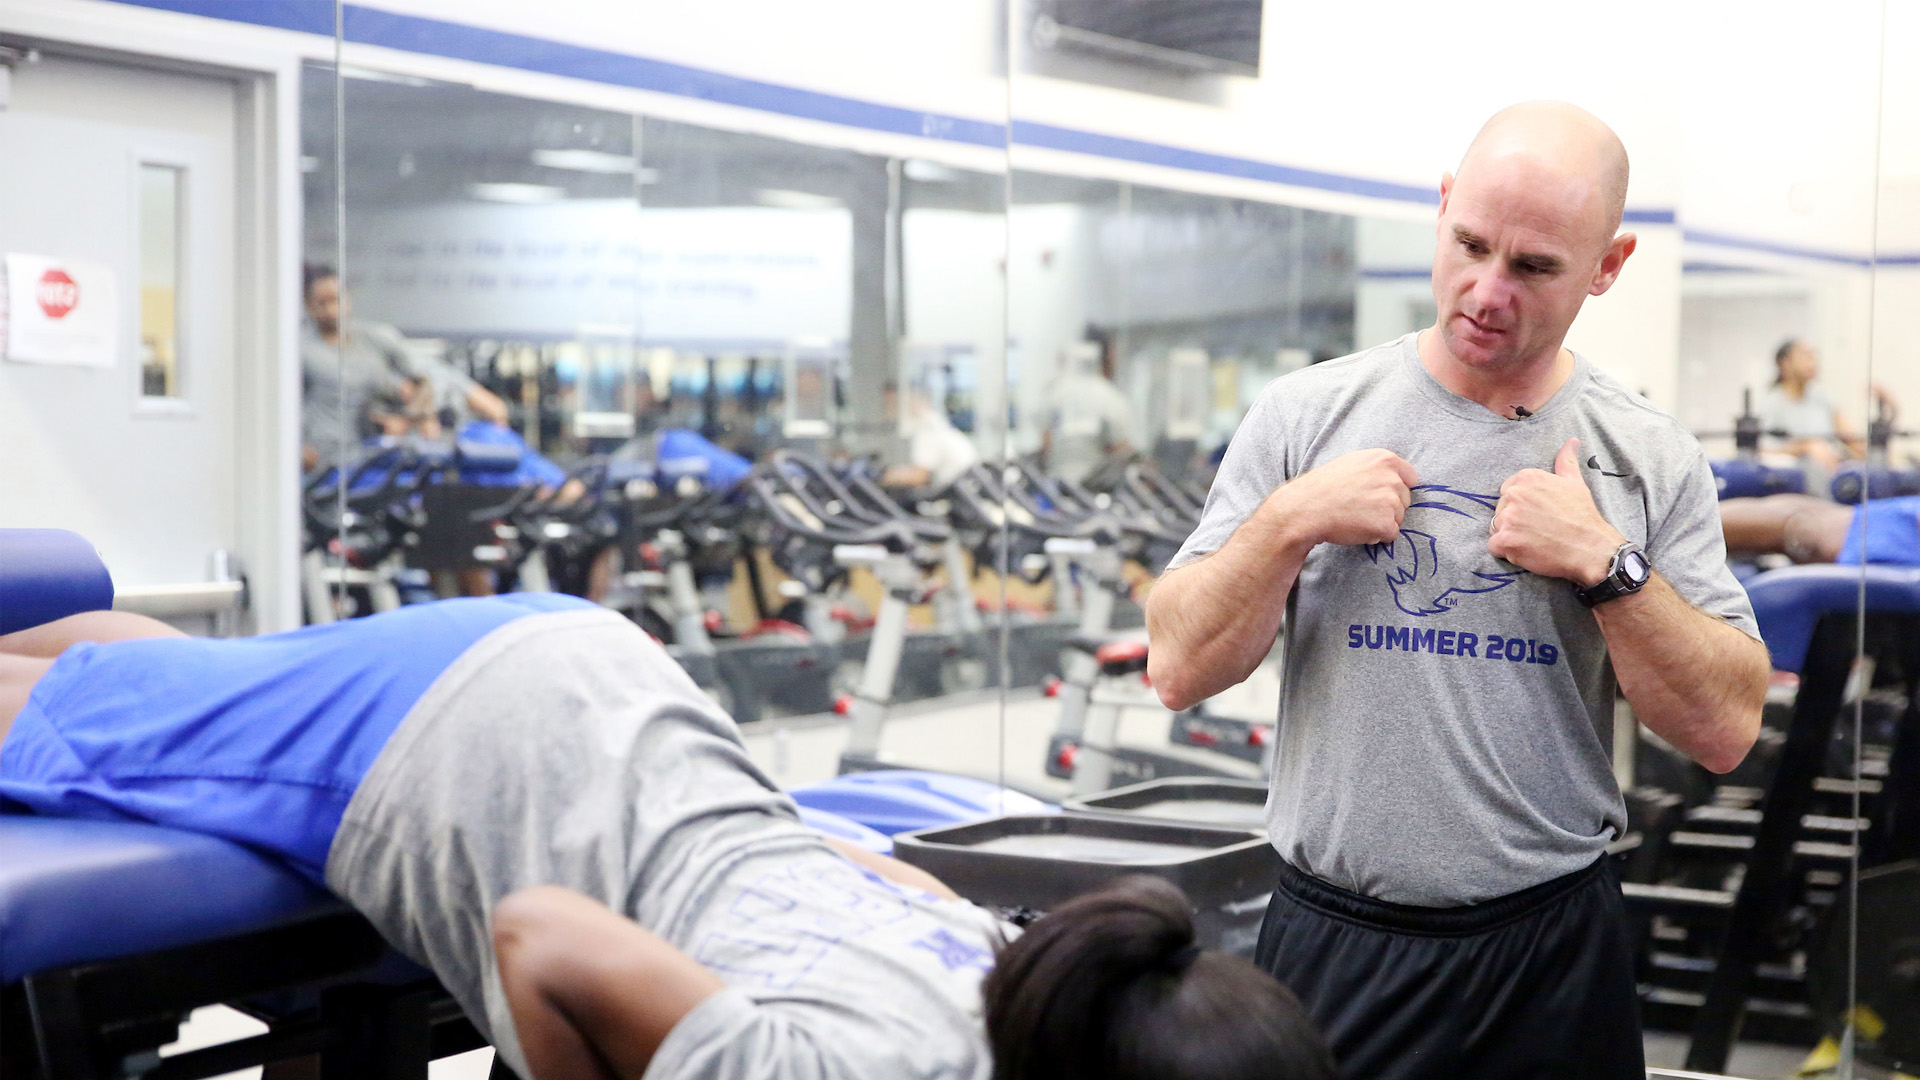 John Spurlock Named CSCCA Master Strength and Conditioning Coach